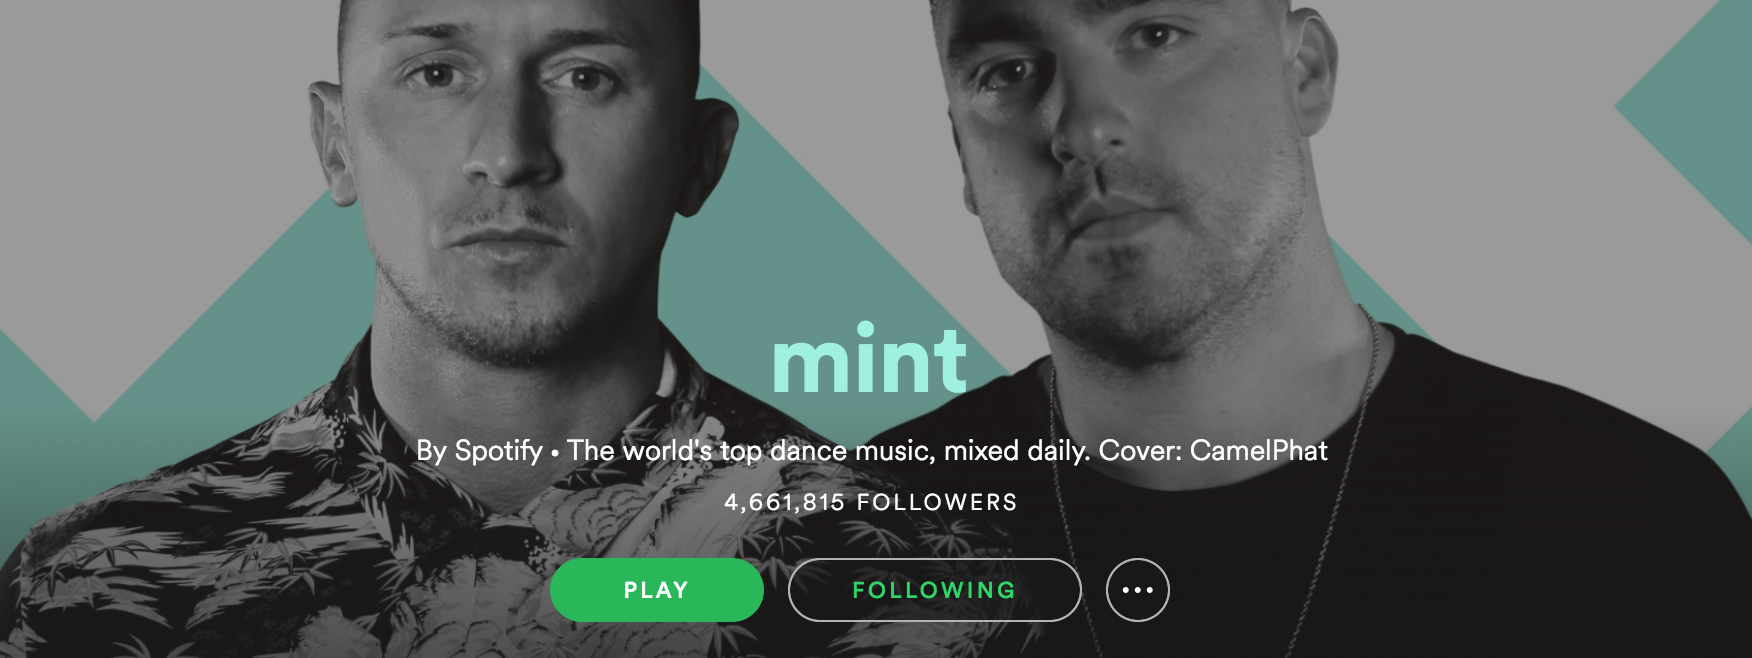 Minty Fresh: Spotify Makes a New Home for EDM